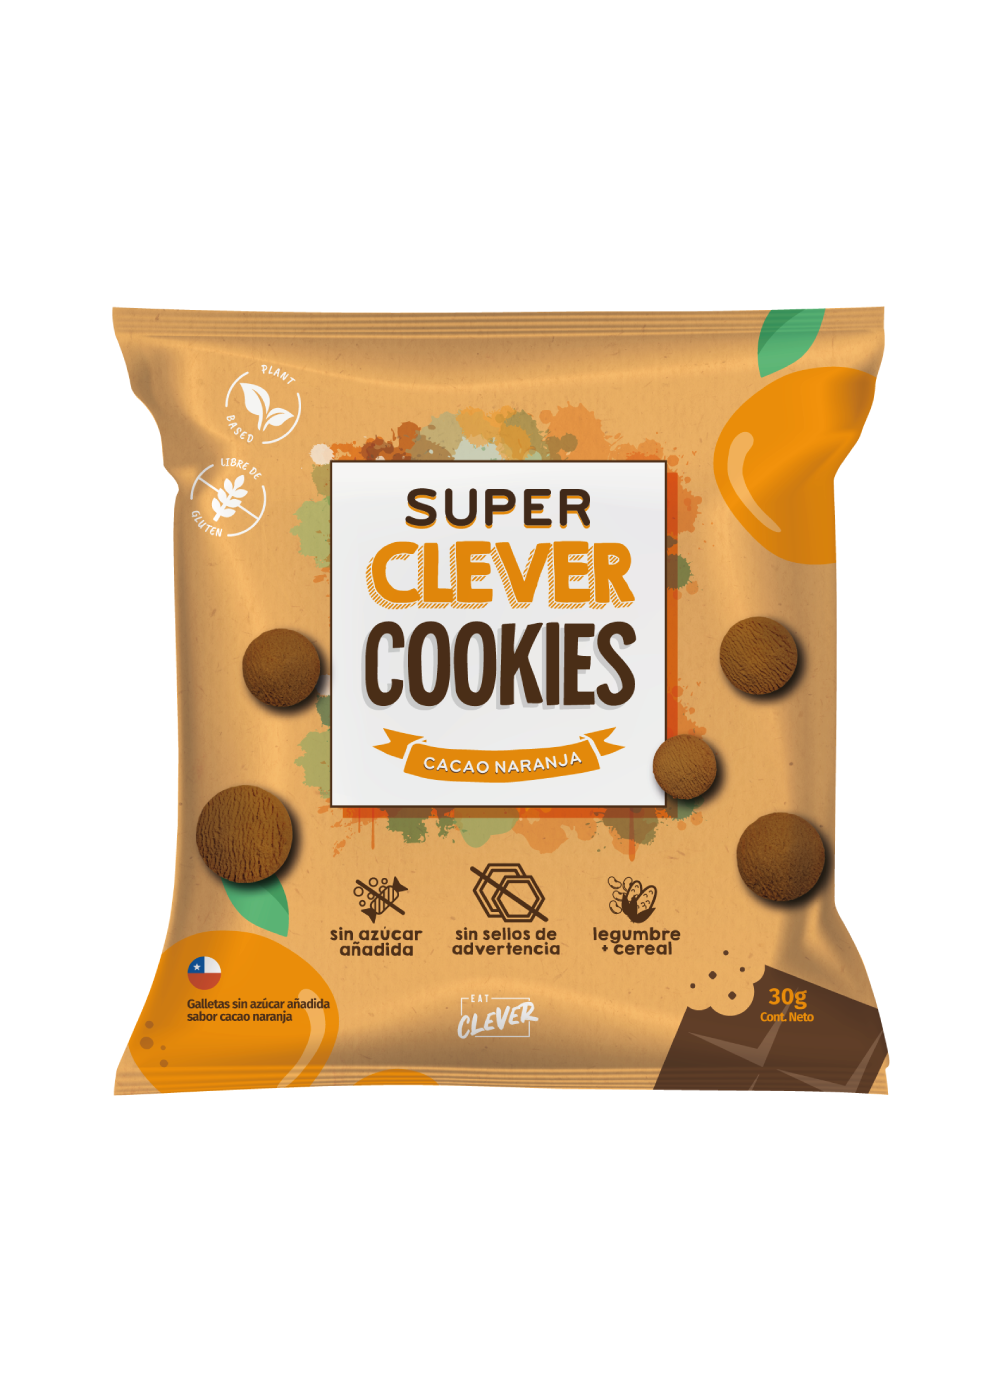 Galletas Super Clever Cookies Cacao Naranja Eat Clever 30g